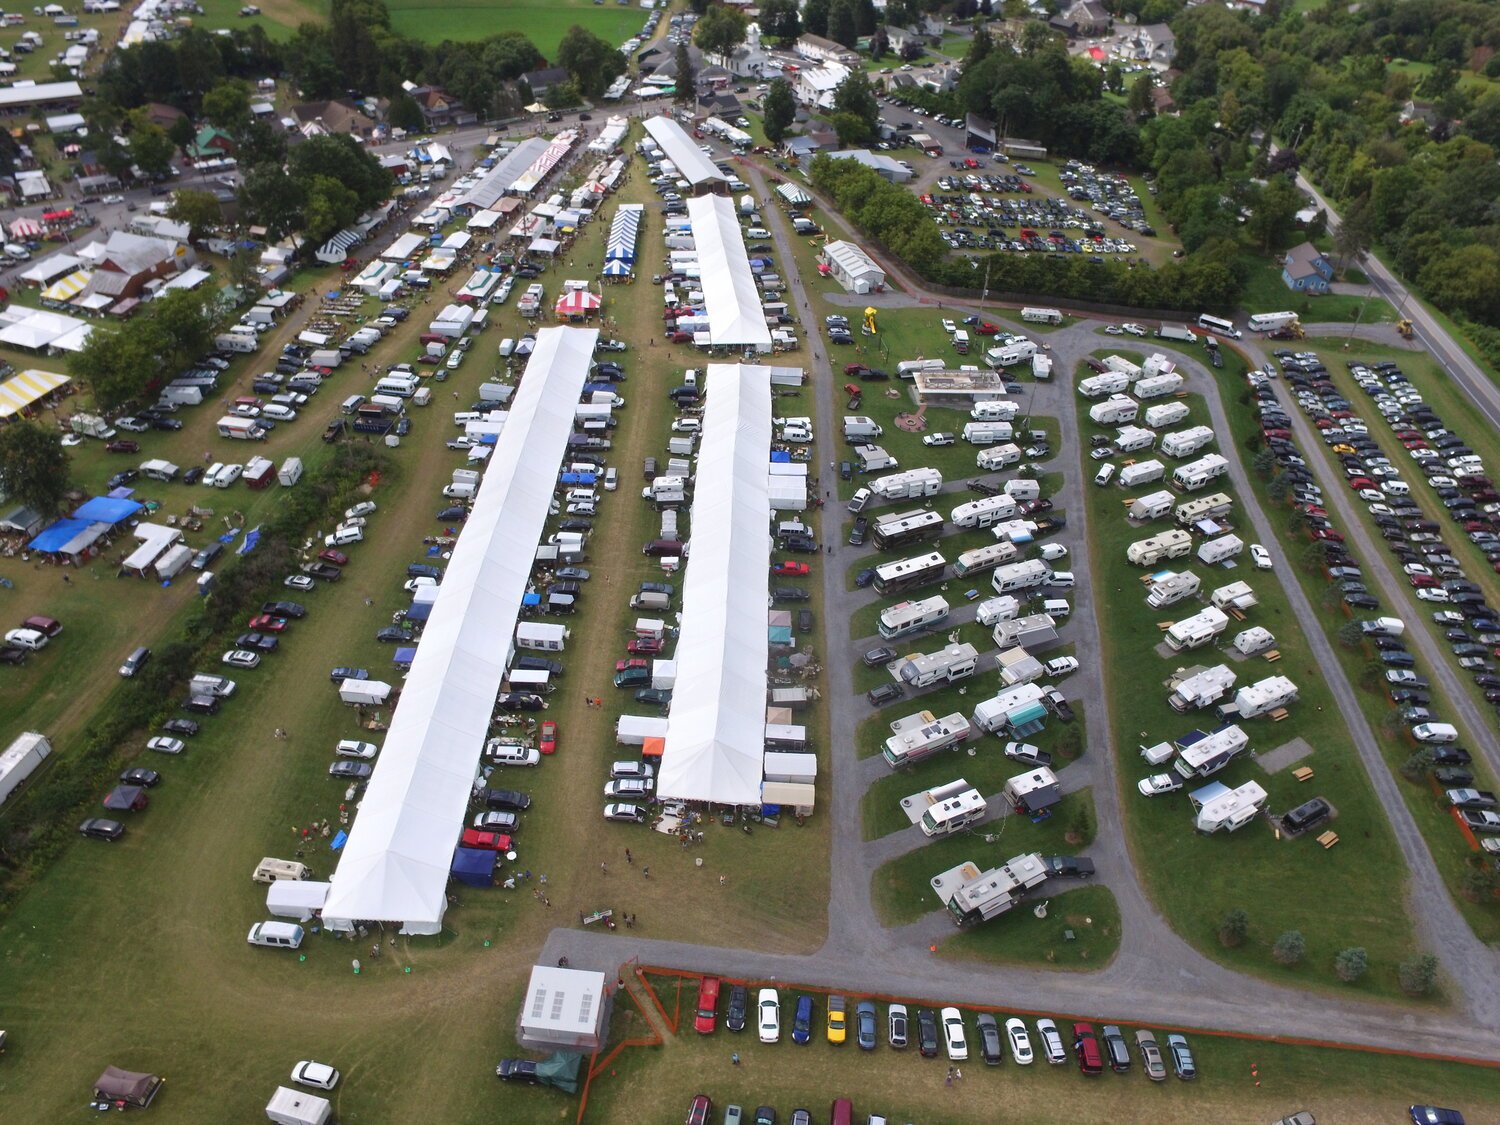 Gallery 1 Event Tents.jpg